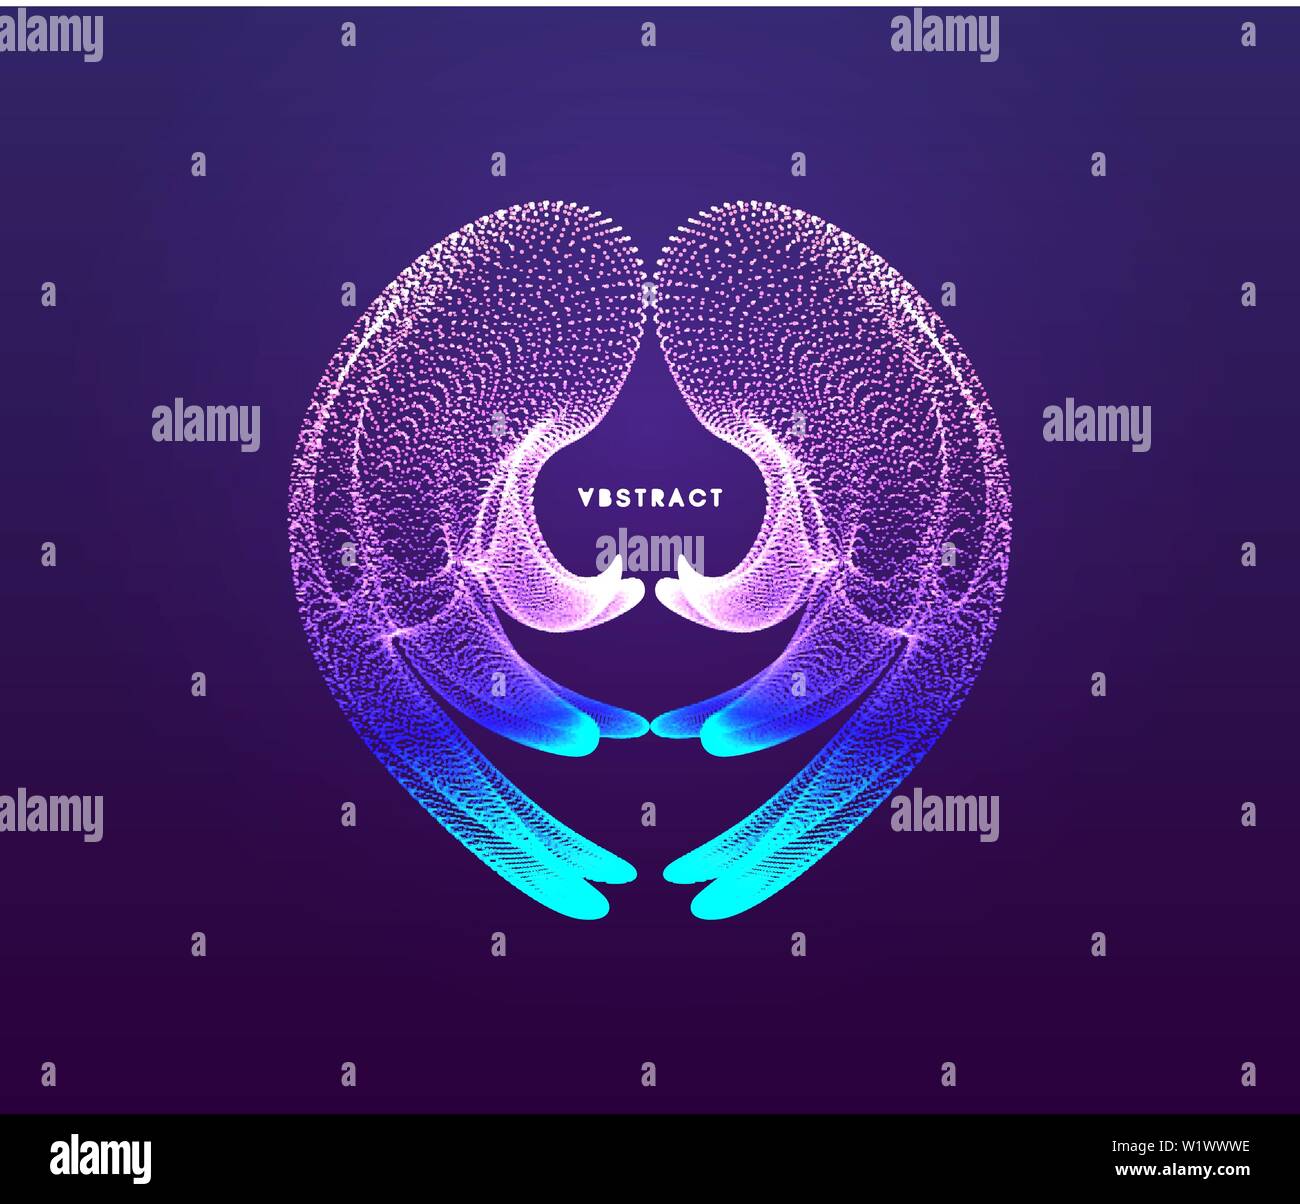 3D connection structure. Futuristic technology style. Abstract design. Vector illustration for science, chemistry or education. Stock Vector